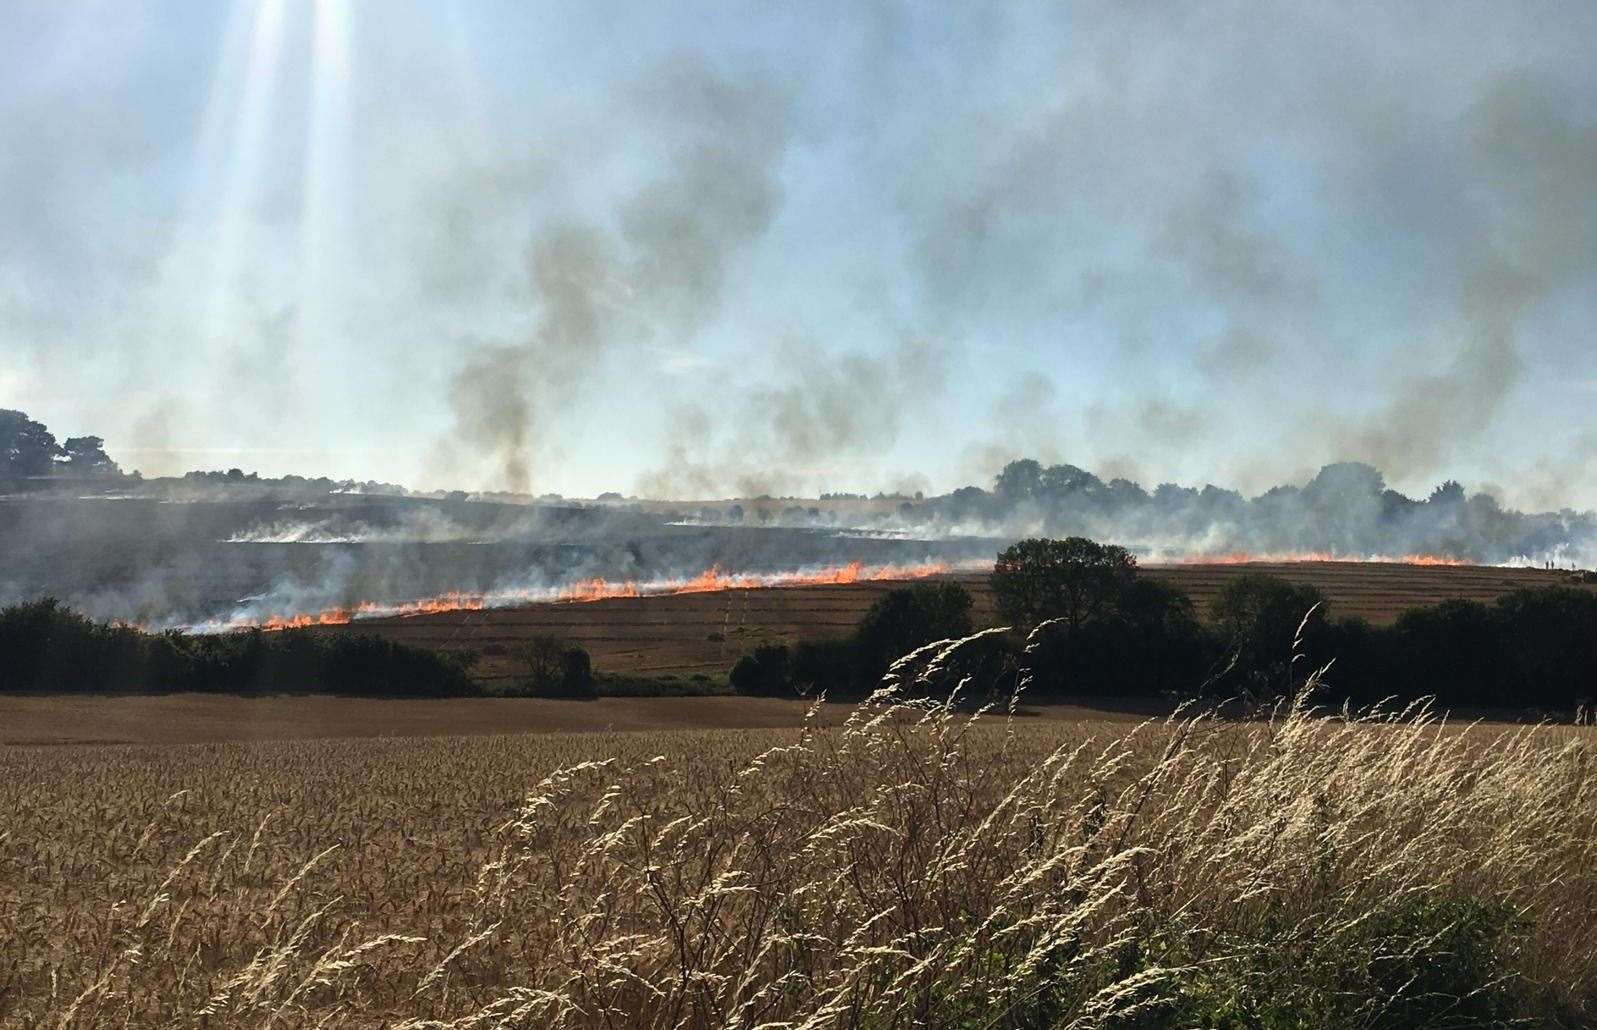 The massive fire is affecting a large area near Longfield Hill